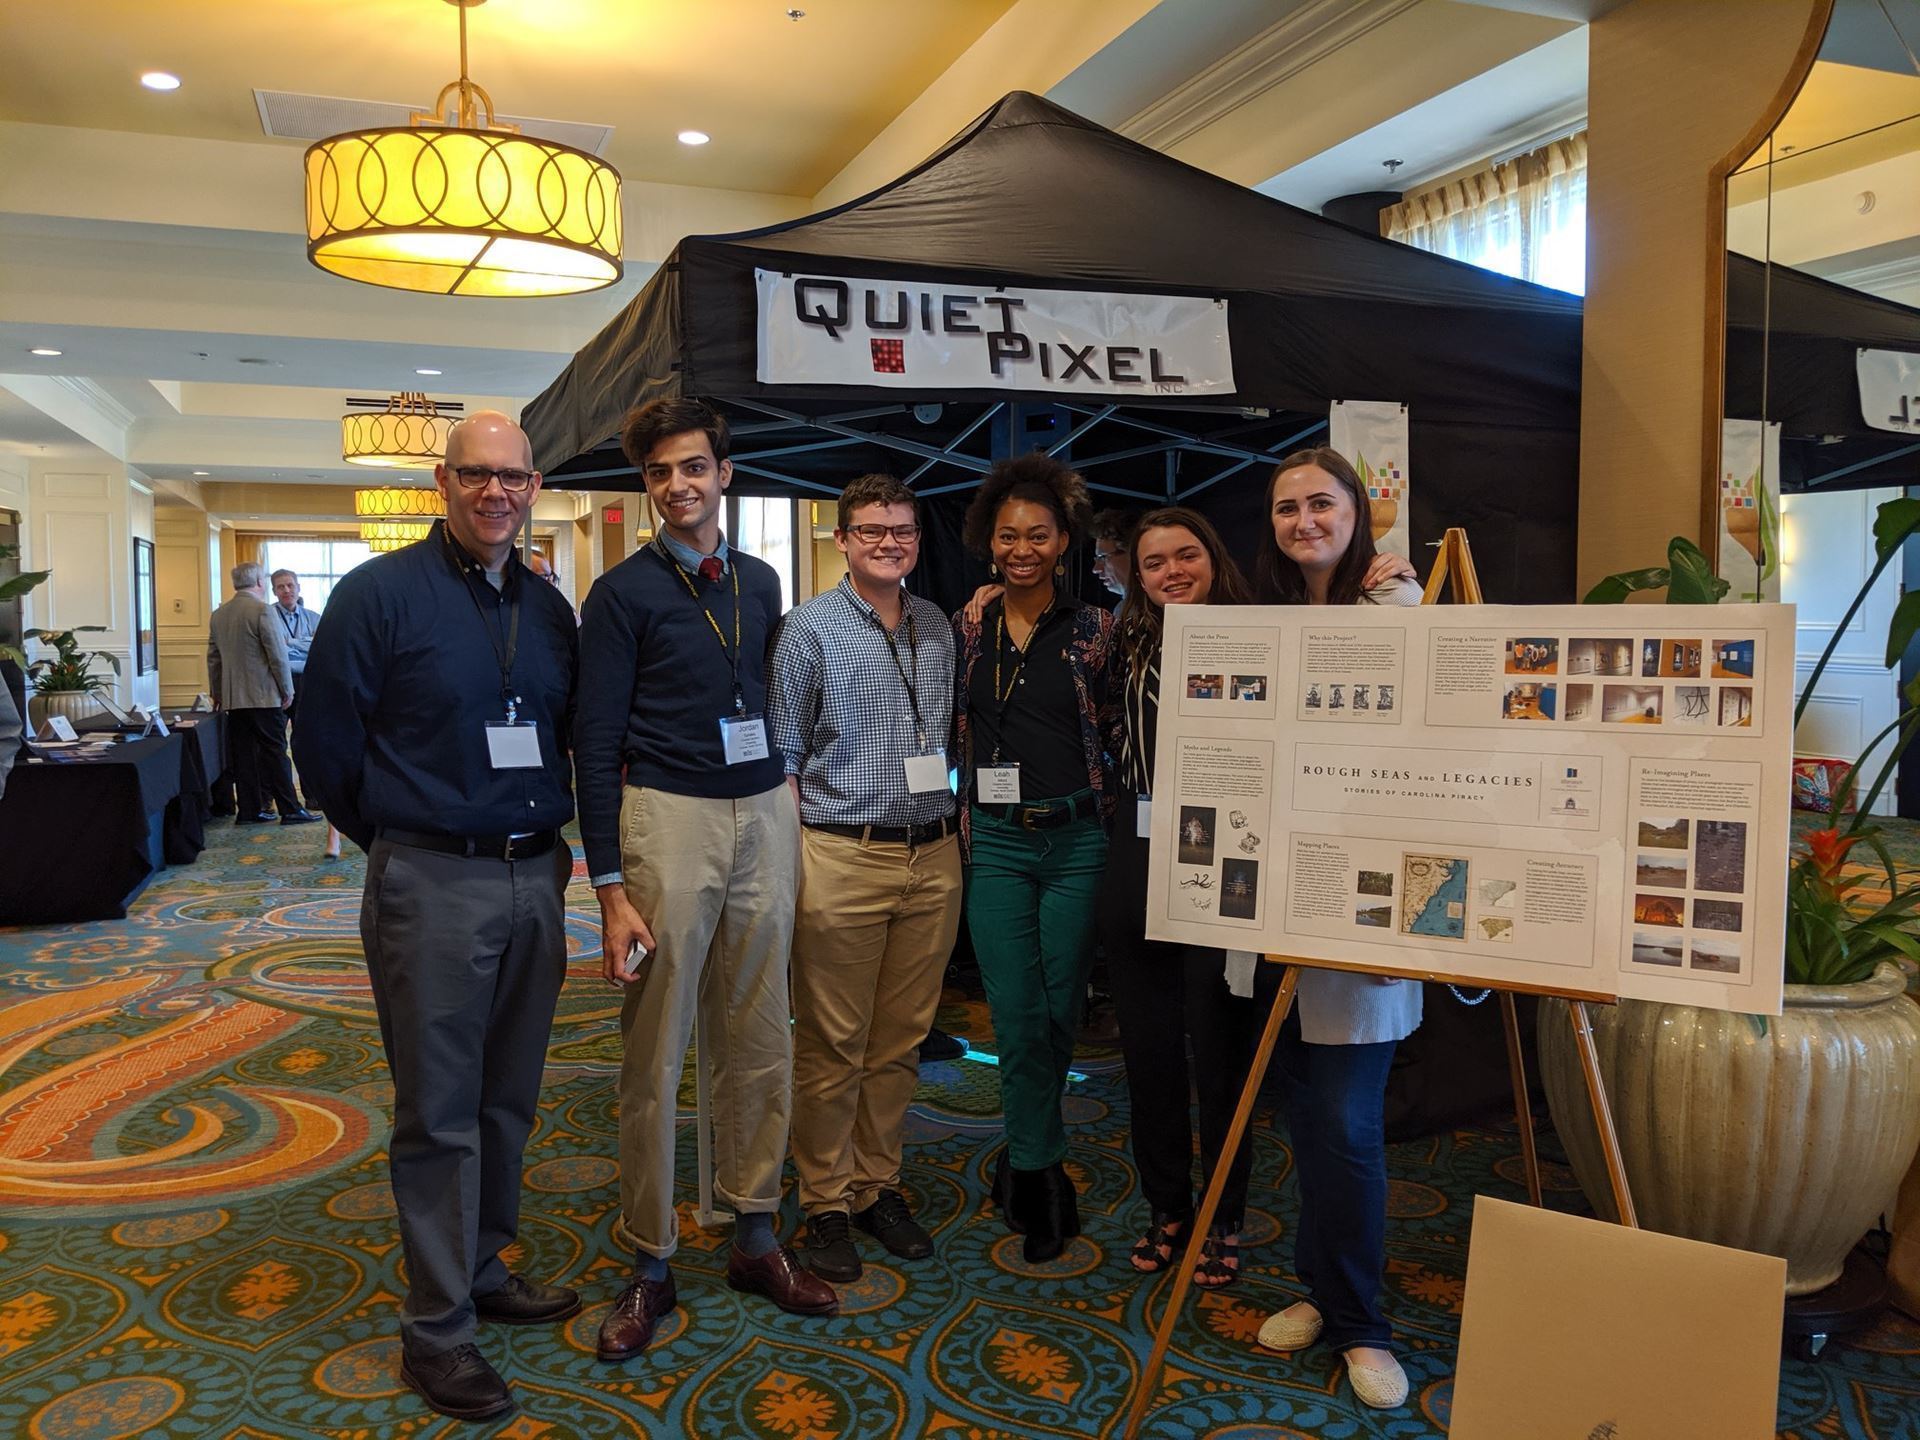 5 people stand next to each other and smile at the camera, in front of the two people on the right, there is a poster presentation on an easel. Behind them is a black tent that says "Quiet Pixel". They stand in a hallway.